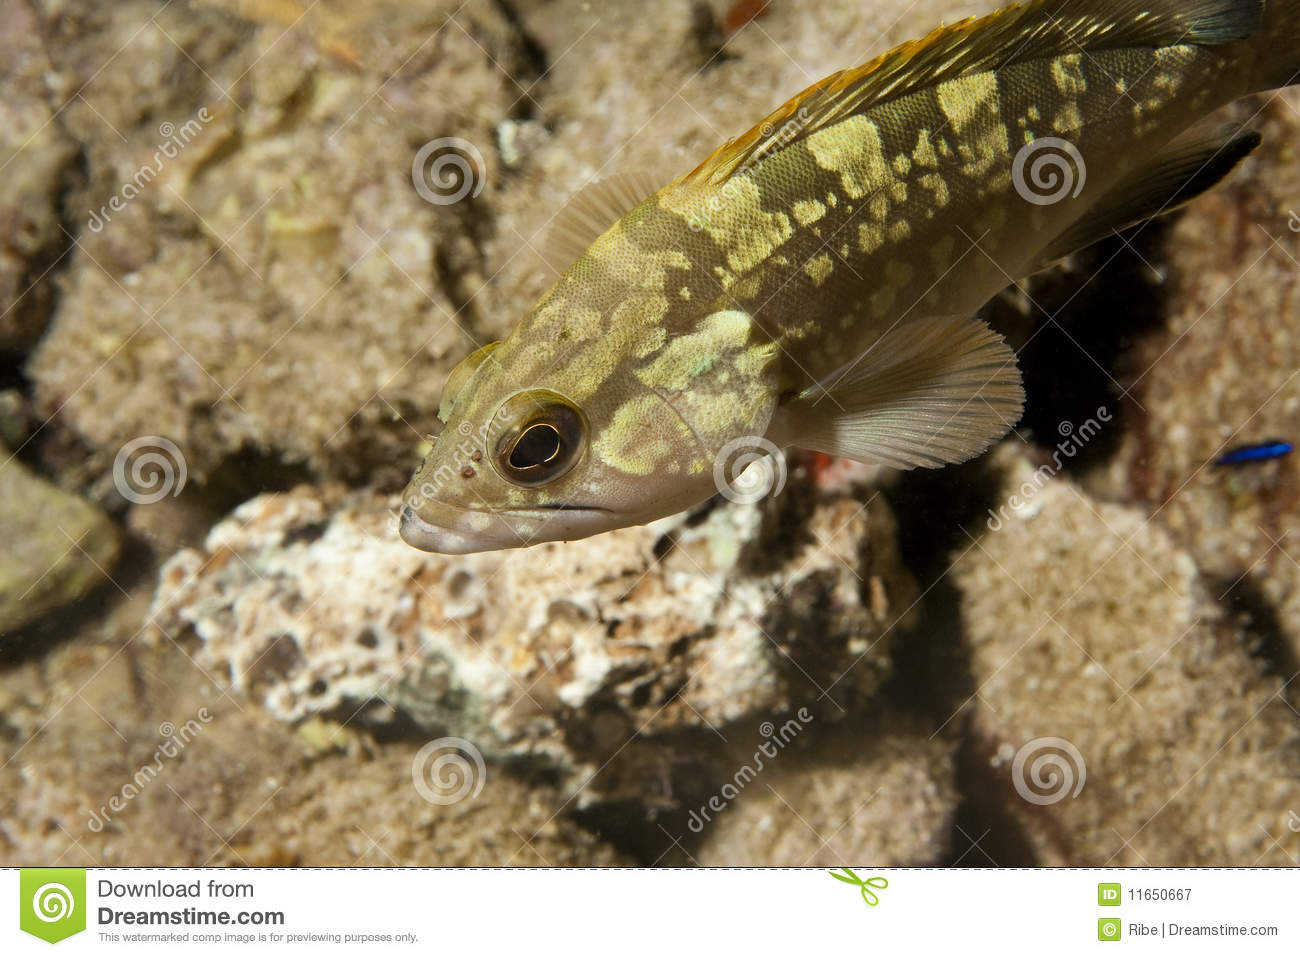 Grouper Fish Royalty Free Stock Photography   Image  11650667